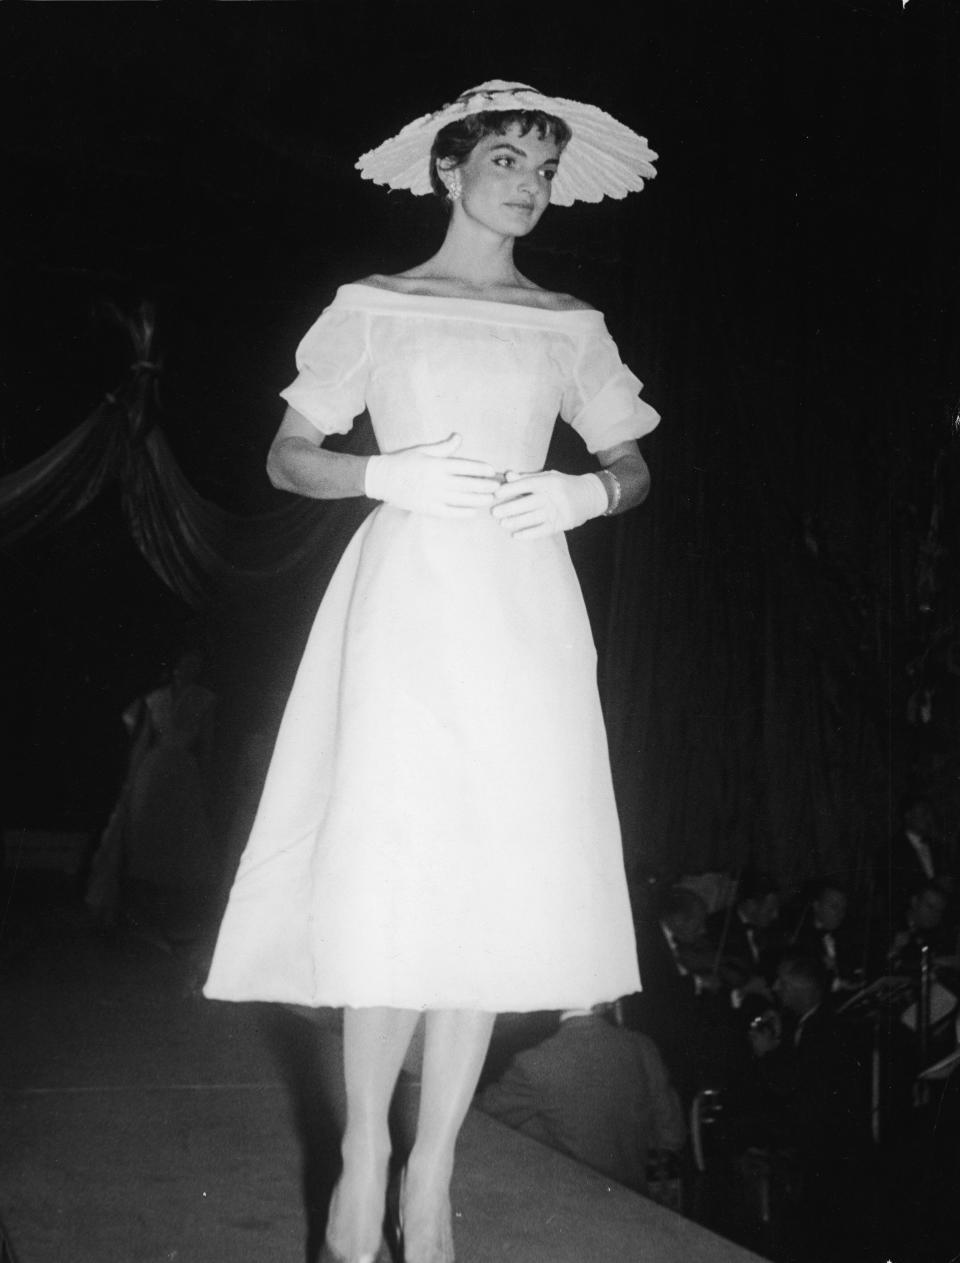 Kennedy walks the catwalk as she models a French designer dress, gloves and hat at the annual April in Paris ball at the Waldorf Astoria Hotel in New York City.